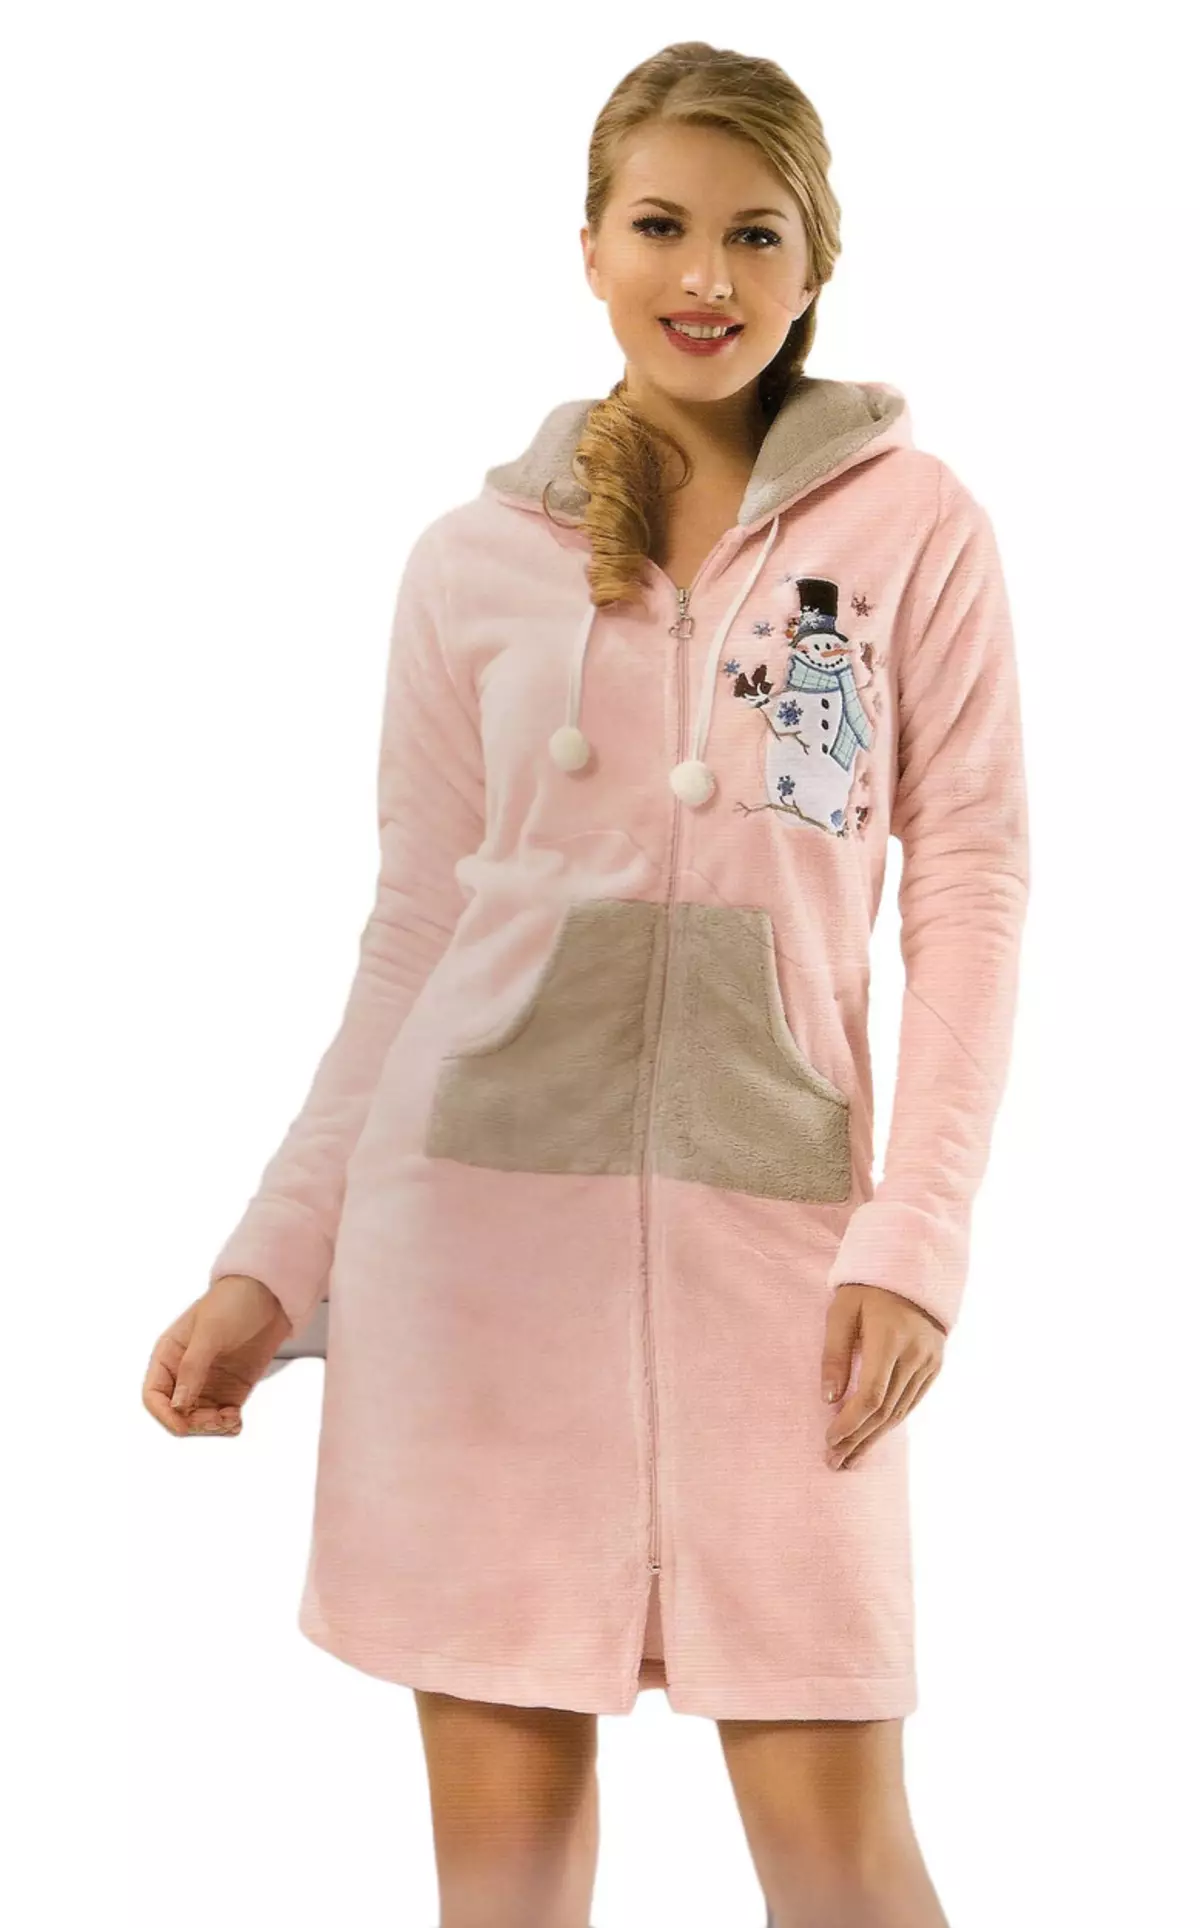 Women's terry robe with a hood (25 photos): Long bath and bathrooms on zipper and with ears 1592_13